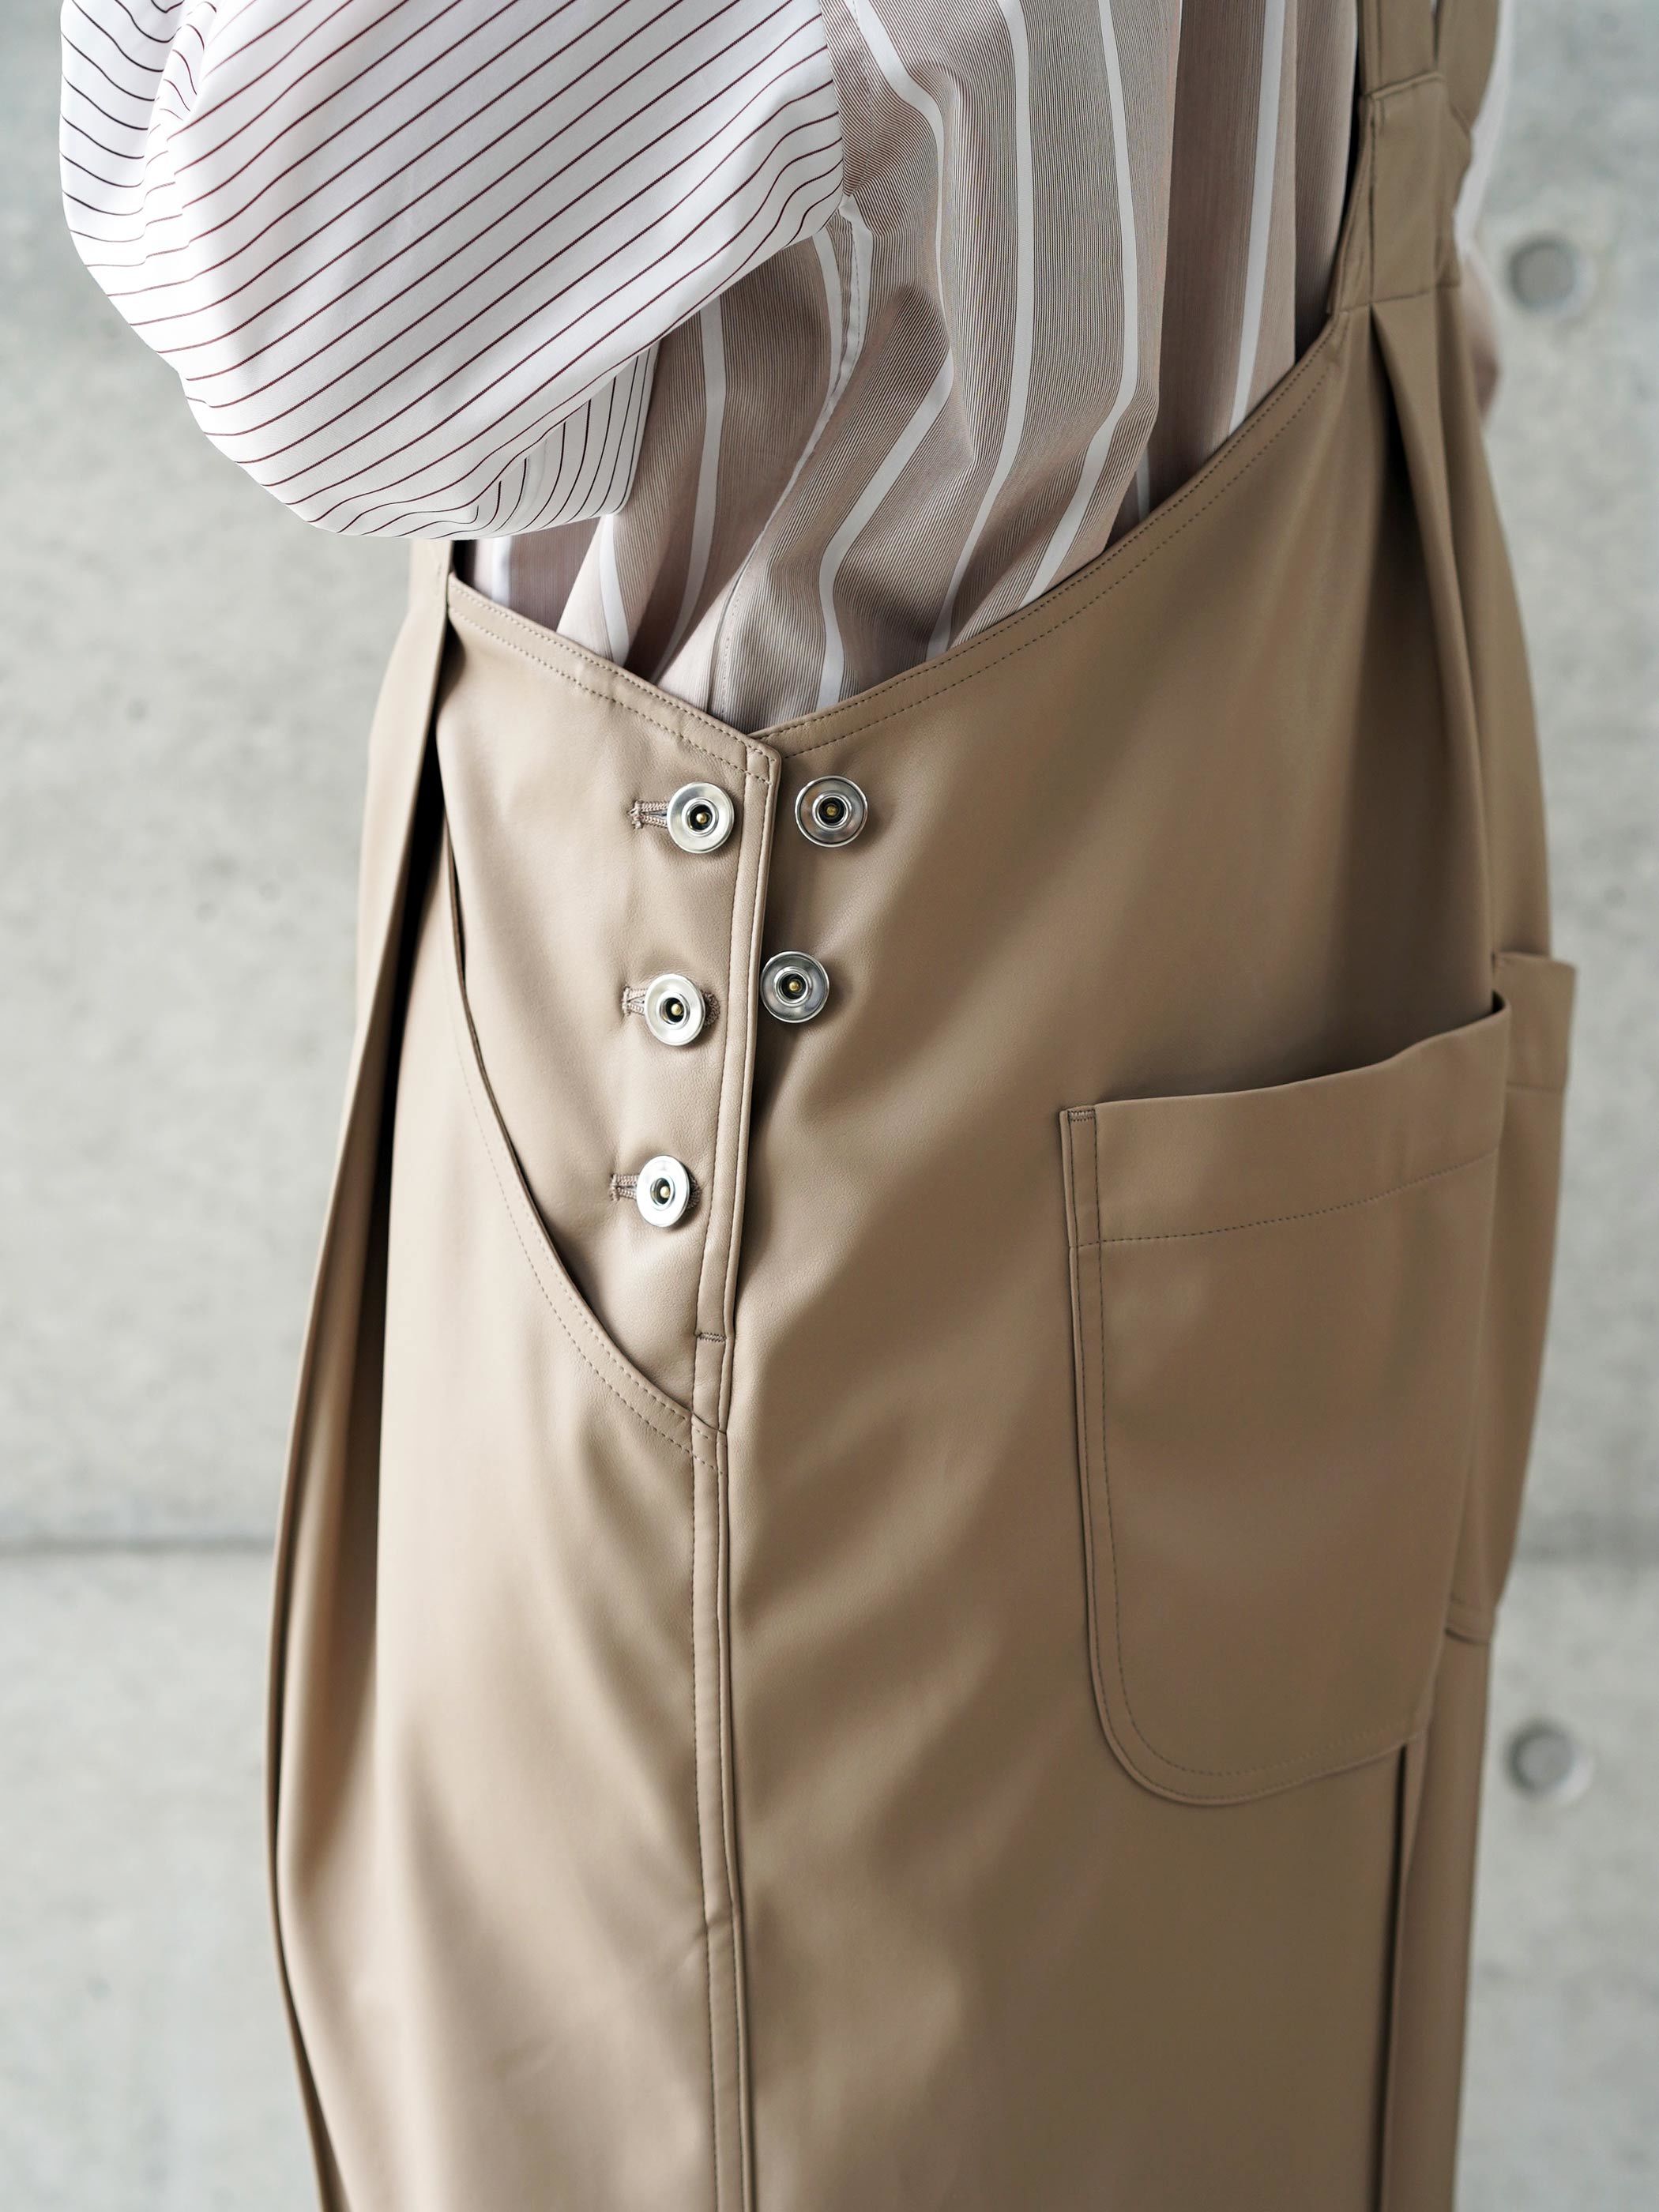 Center Pleats Over All